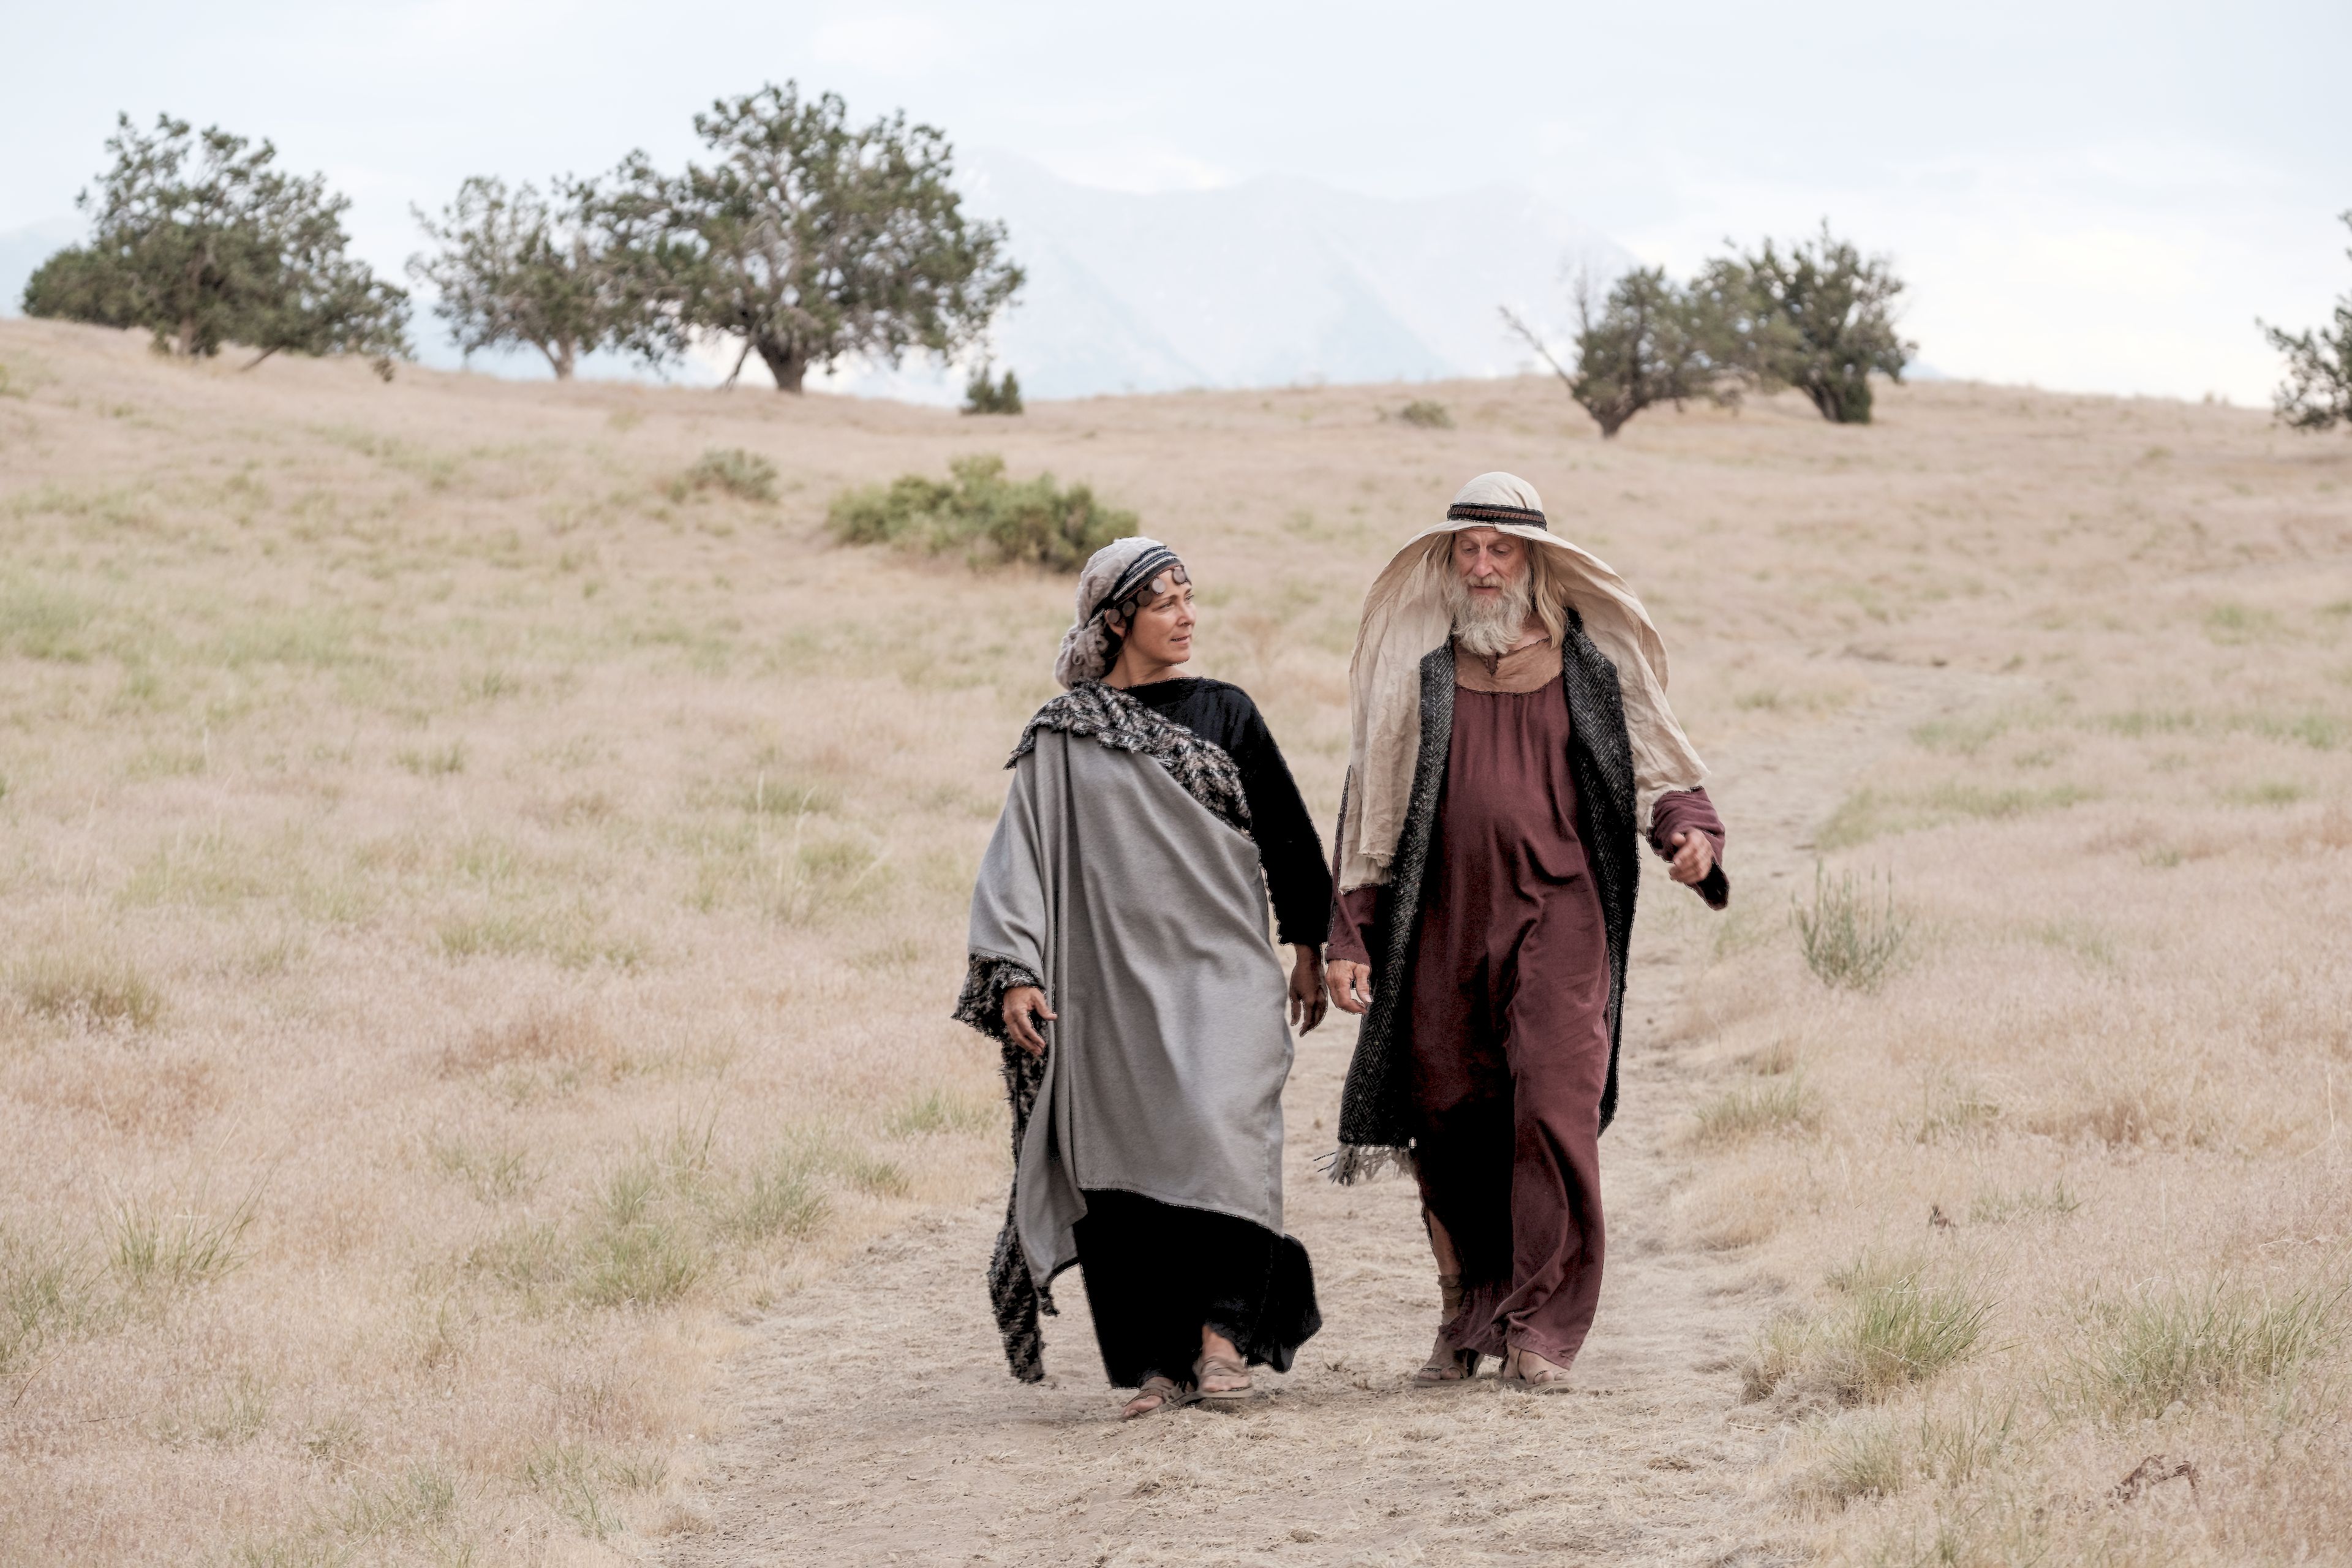 Ishmael and his wife walk in the wilderness.